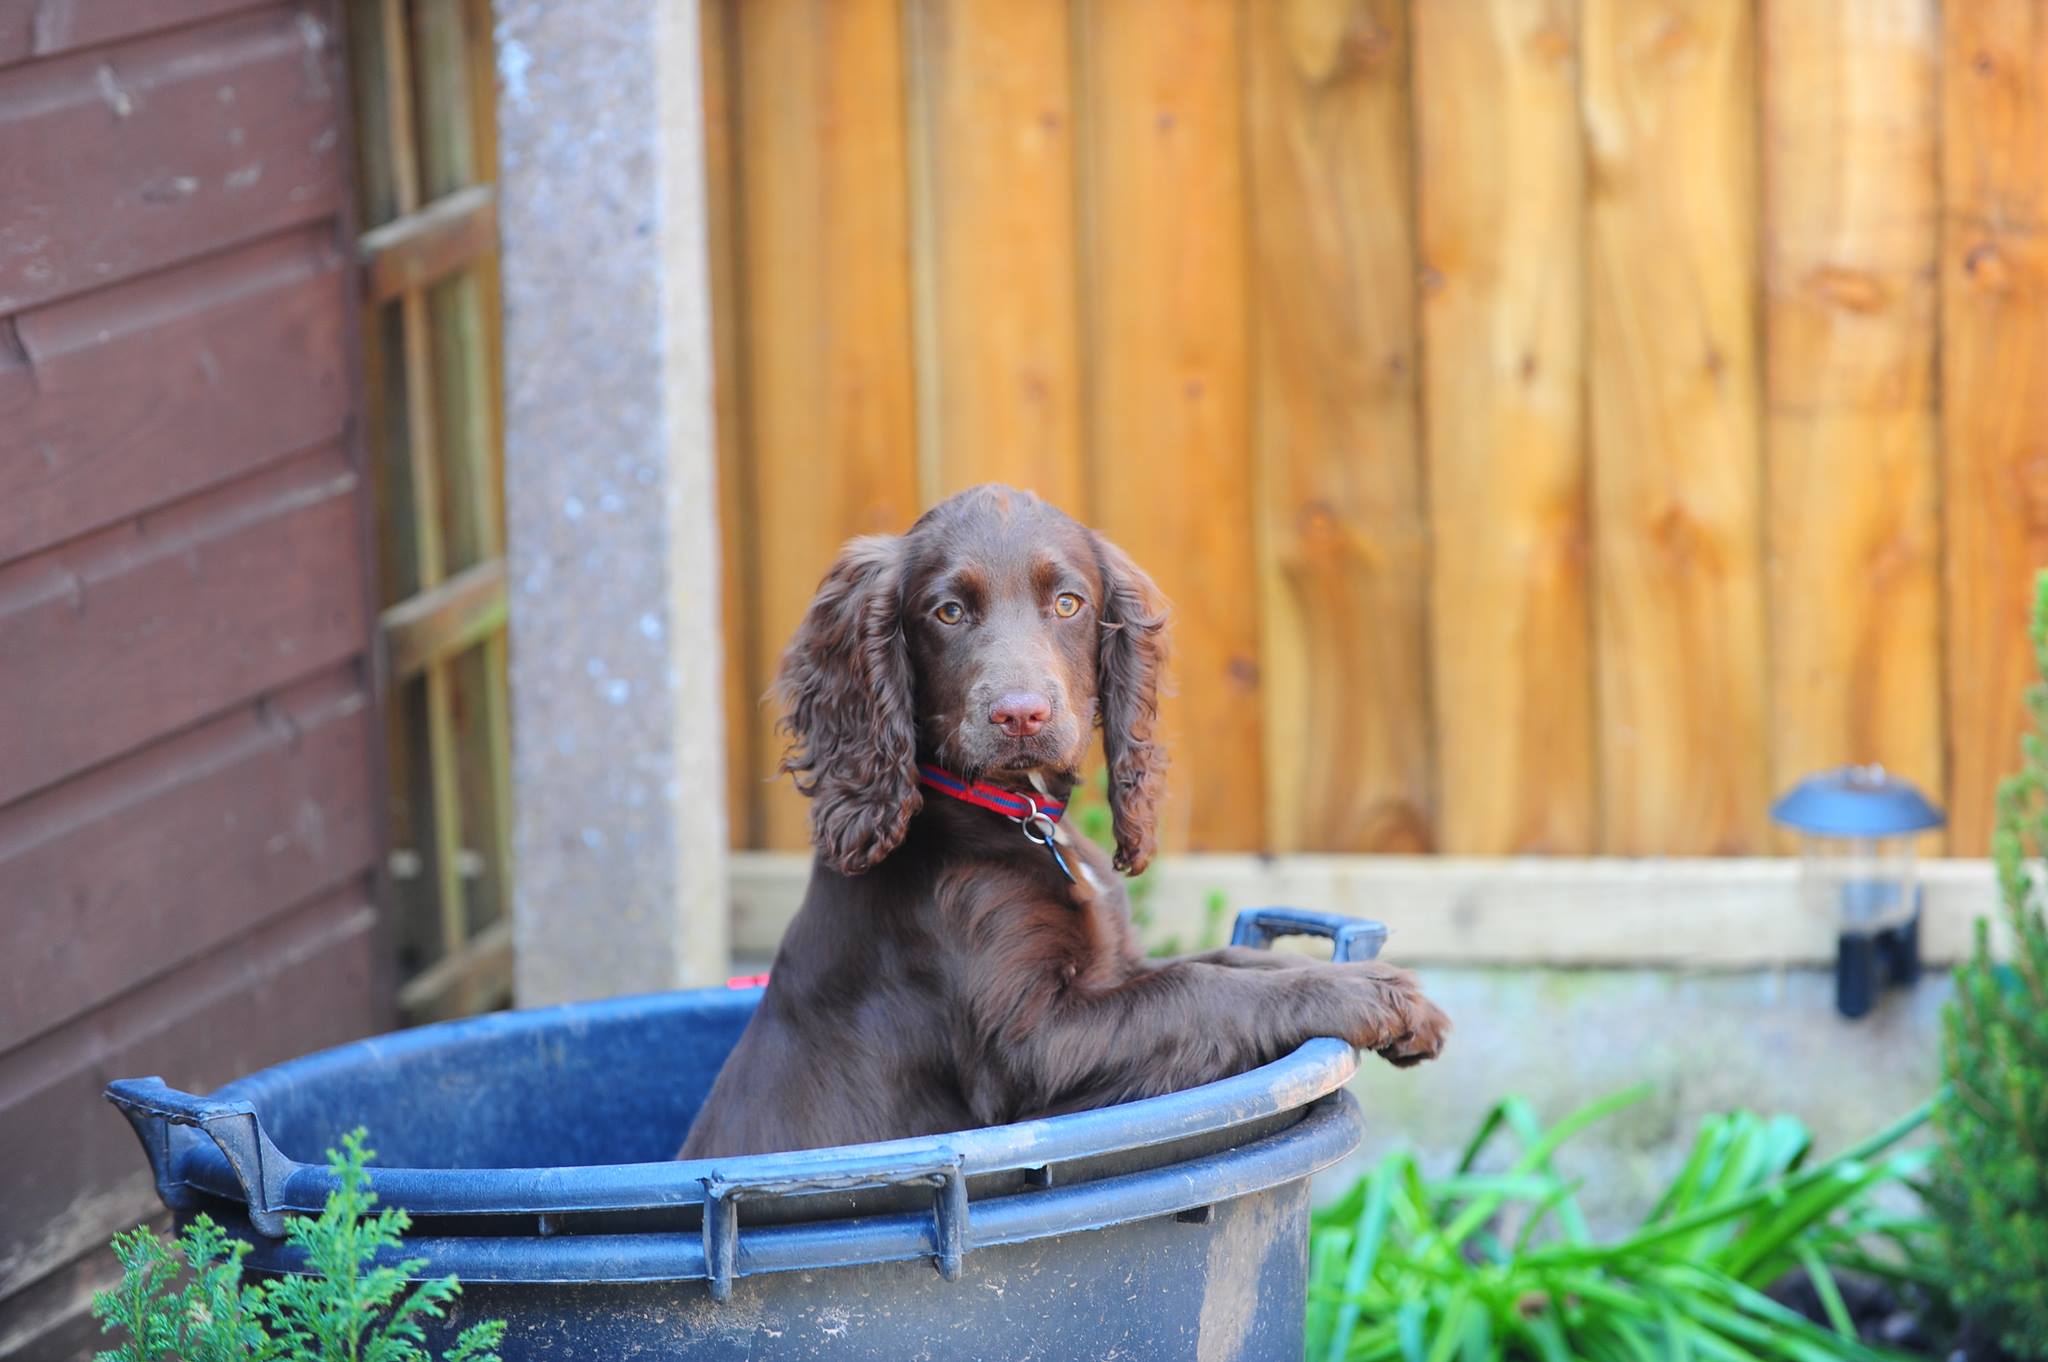 A Cocker Spaniel standing inside the large basin in the garden